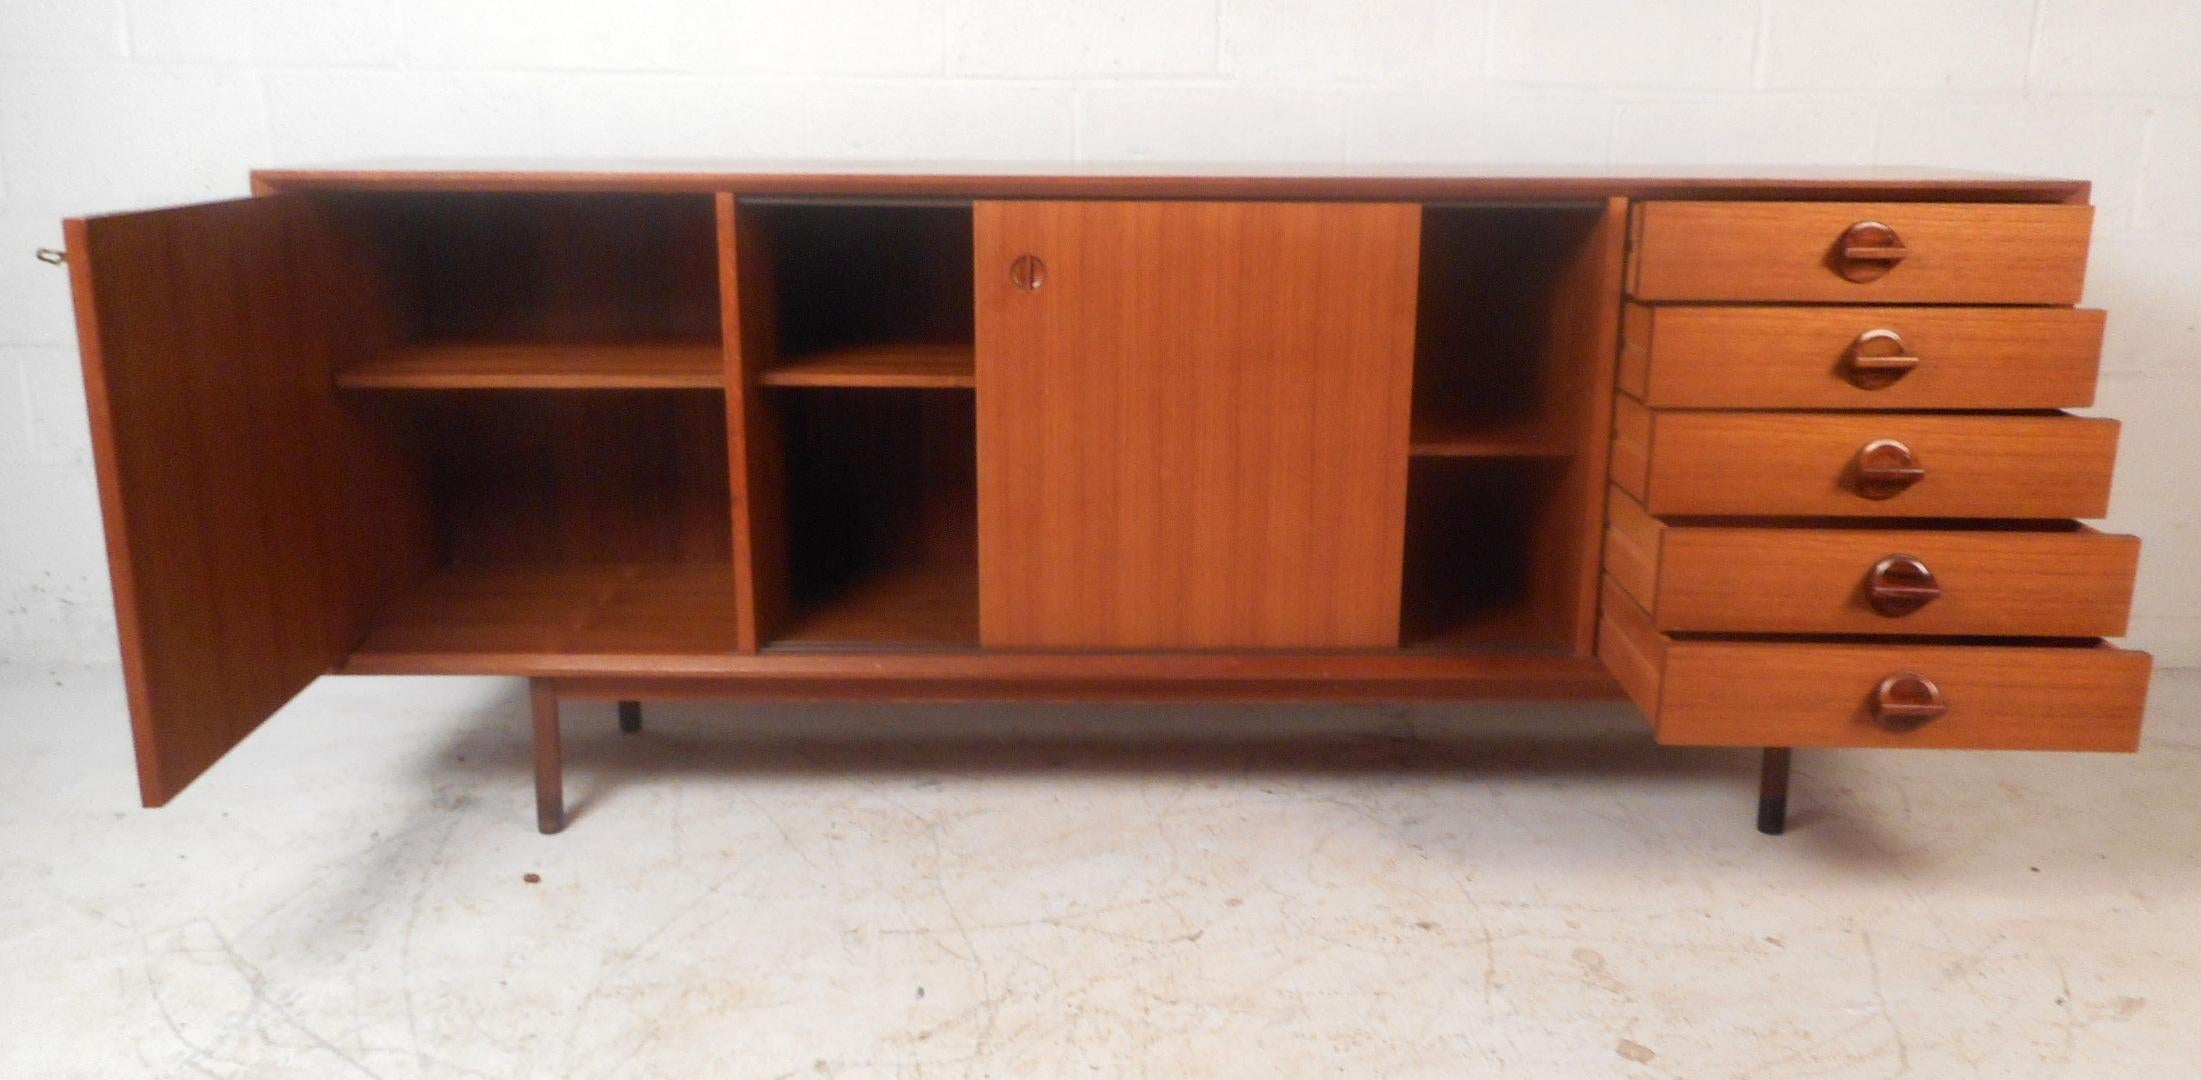 Beautiful Midcentury Italian Teak Credenza In Good Condition For Sale In Brooklyn, NY